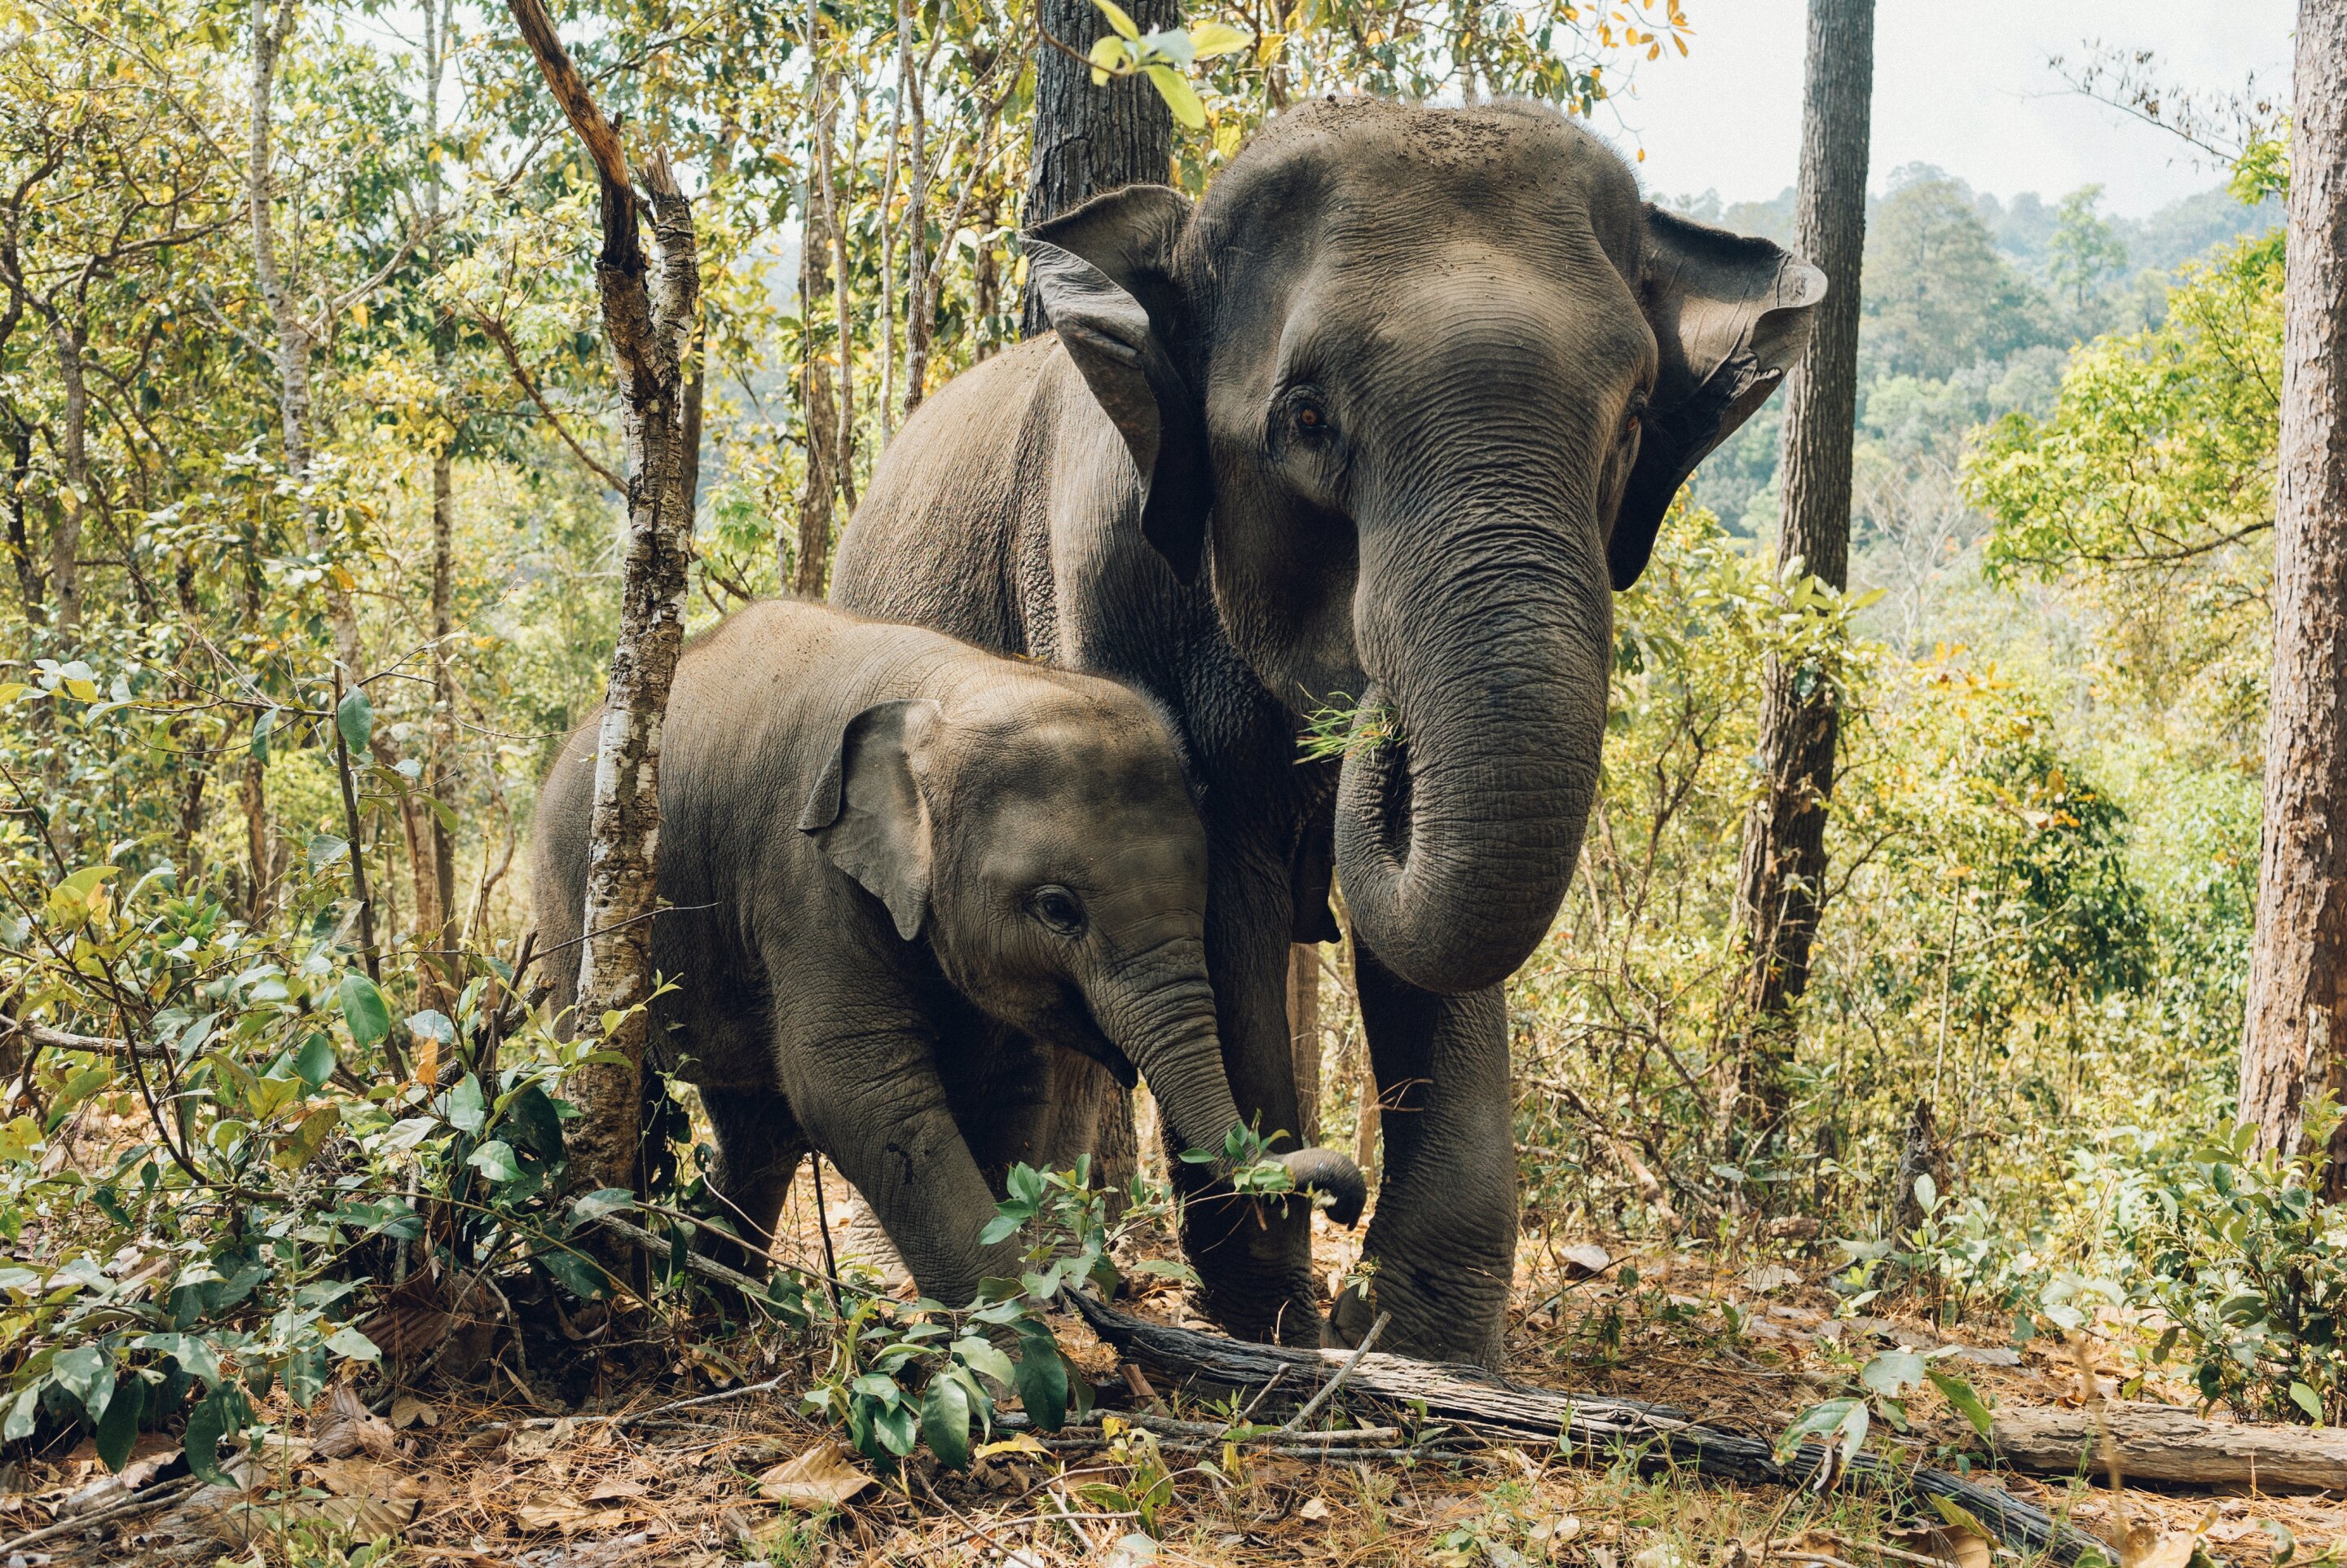 How forest elephants move depends on water, humans, and personality